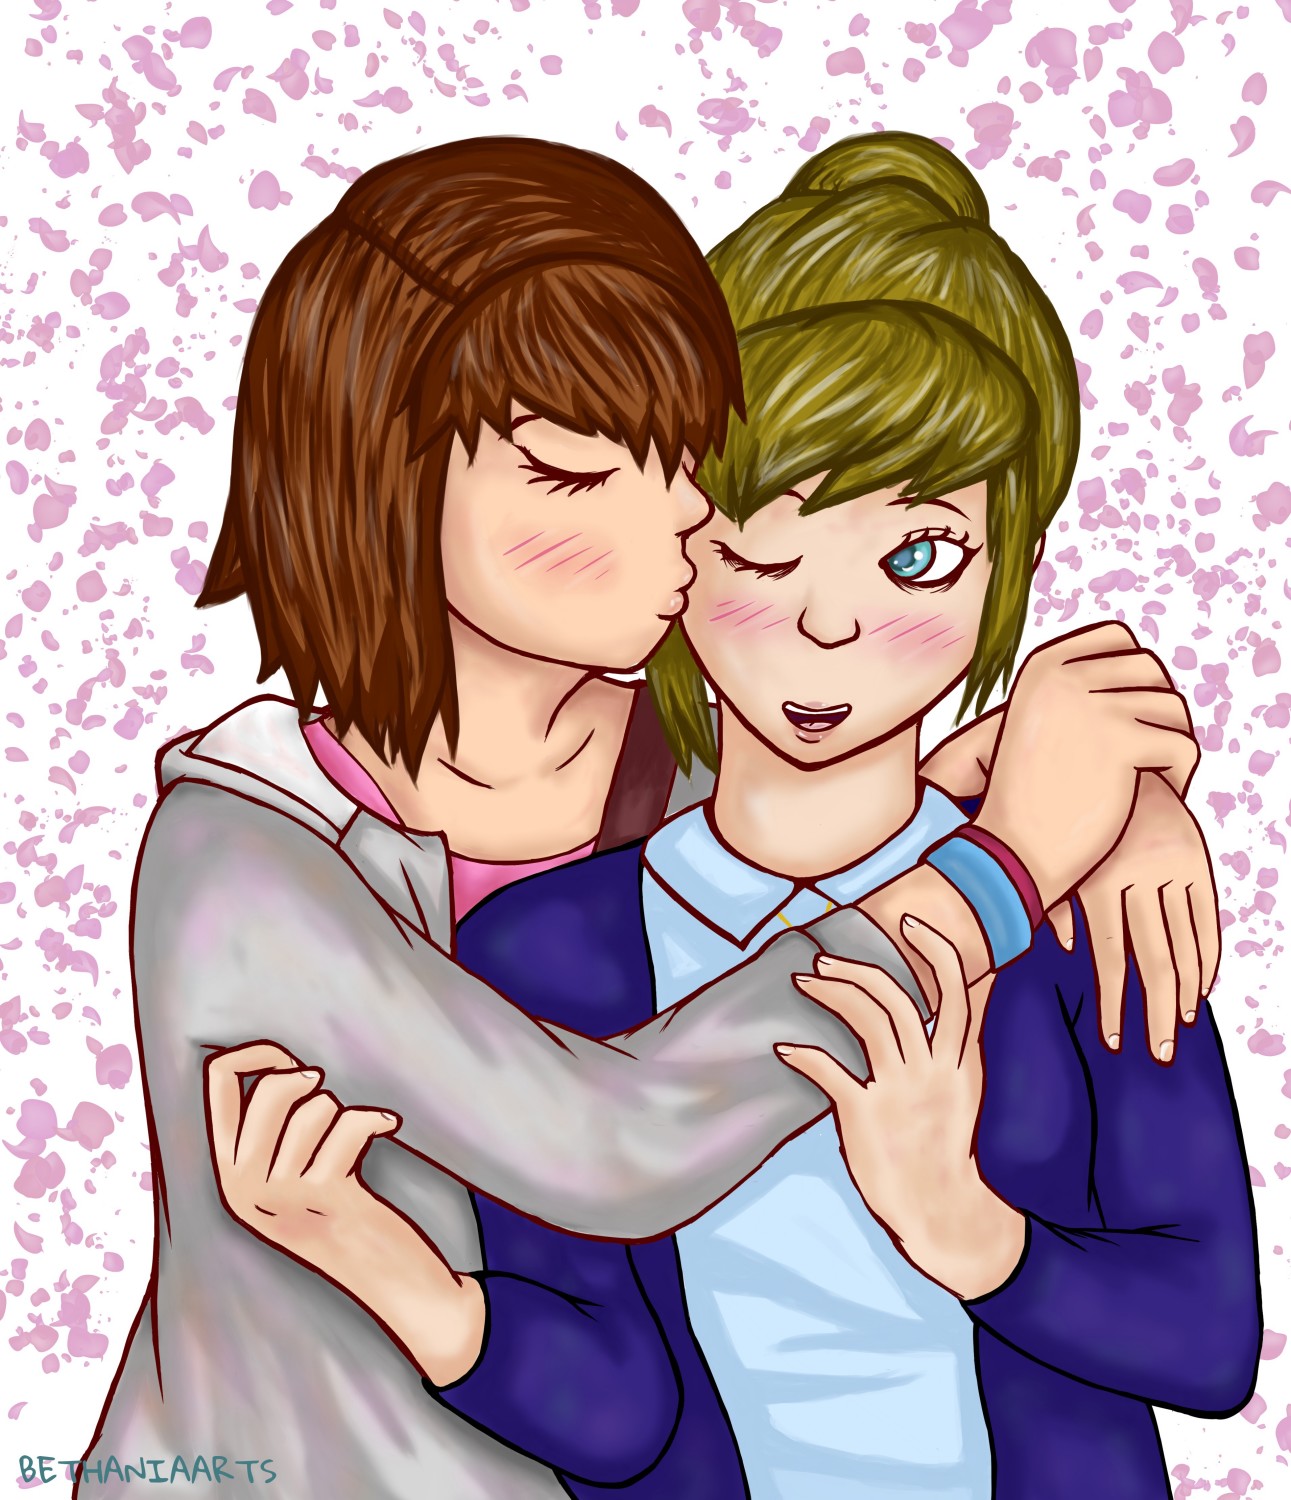 Max and Kate – Life is Strange [Fanart]